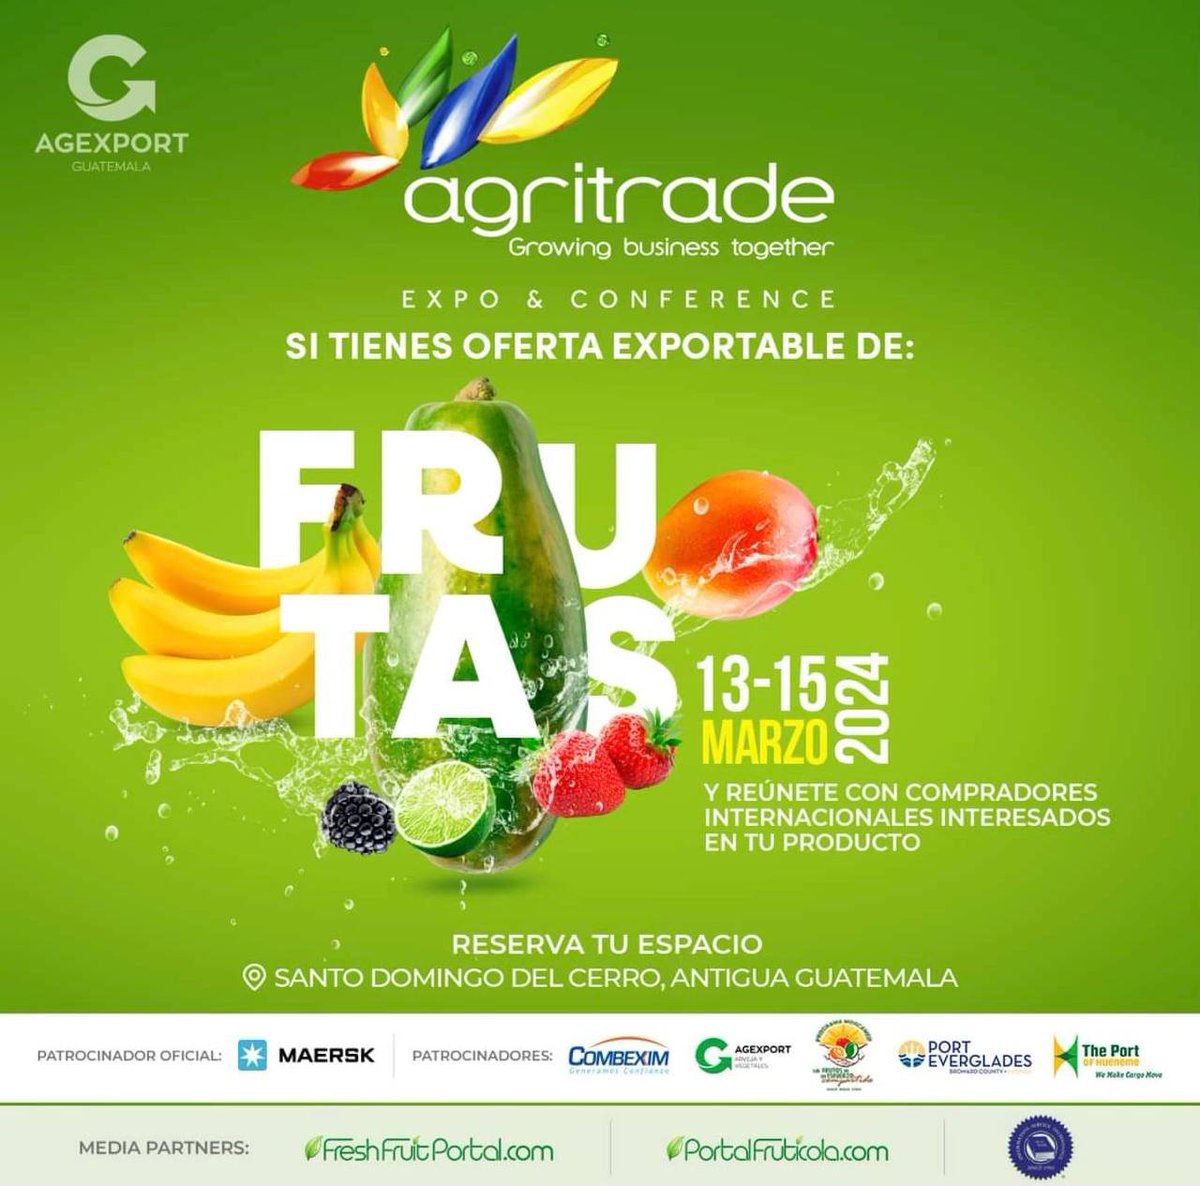 I know you will say this Foto is not related to Crypto, but imo....it is.
$PRAI is going to atend the 2024 Agritrade Expo & Conference by Agexport in Guatemala.
They will get more connections and possible new customers world wide.
#AI and #RWA .
Staking is open, 50% revenue share